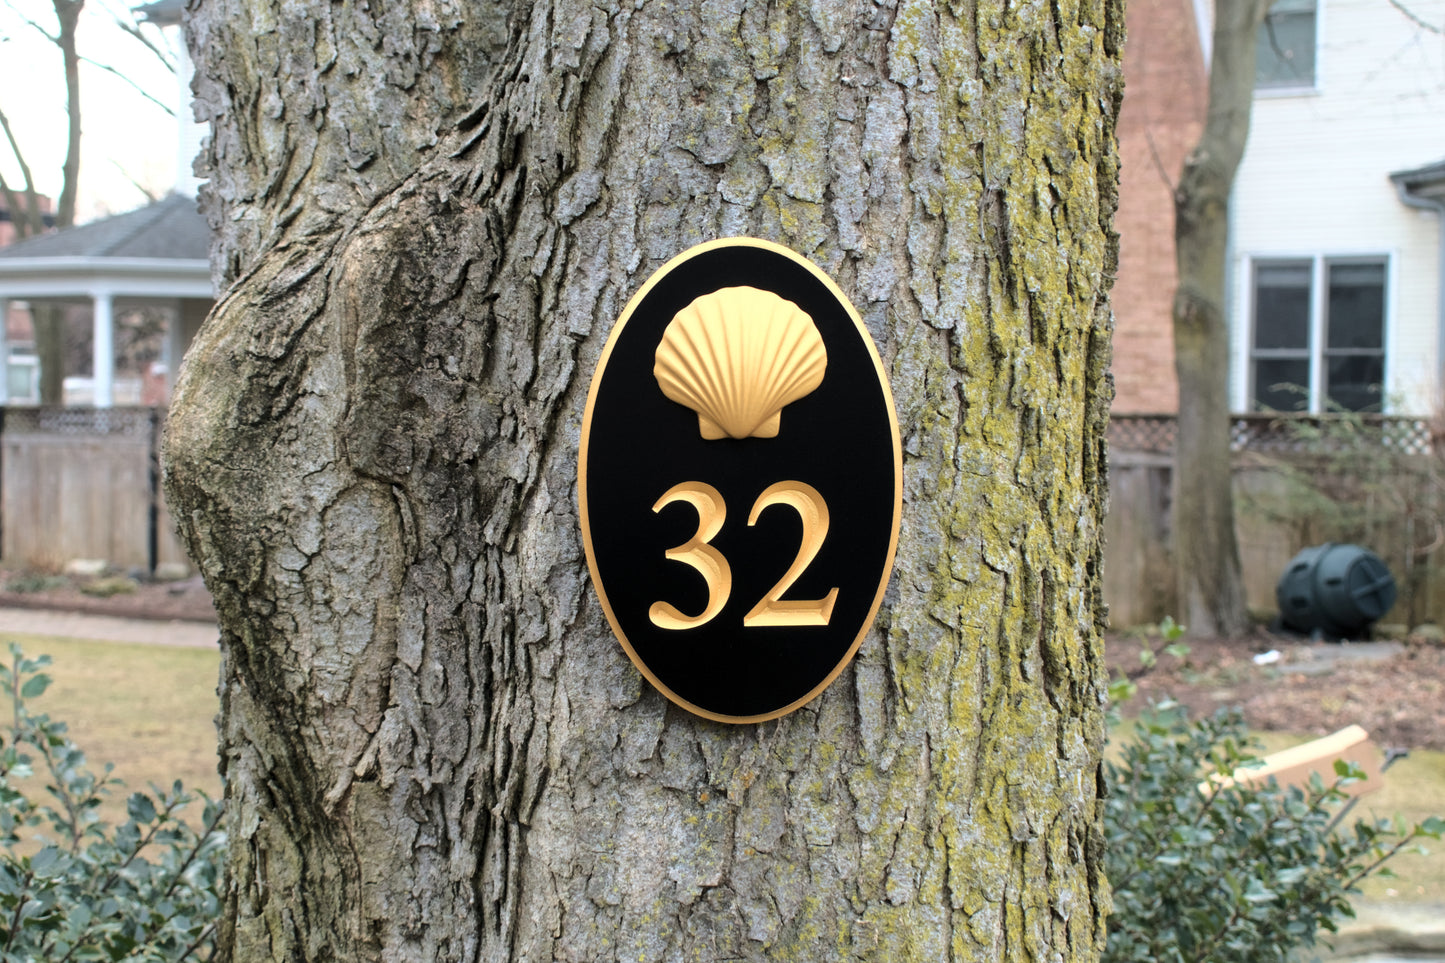 Vertical Oval Carved Address Plaque With Scallop Shell